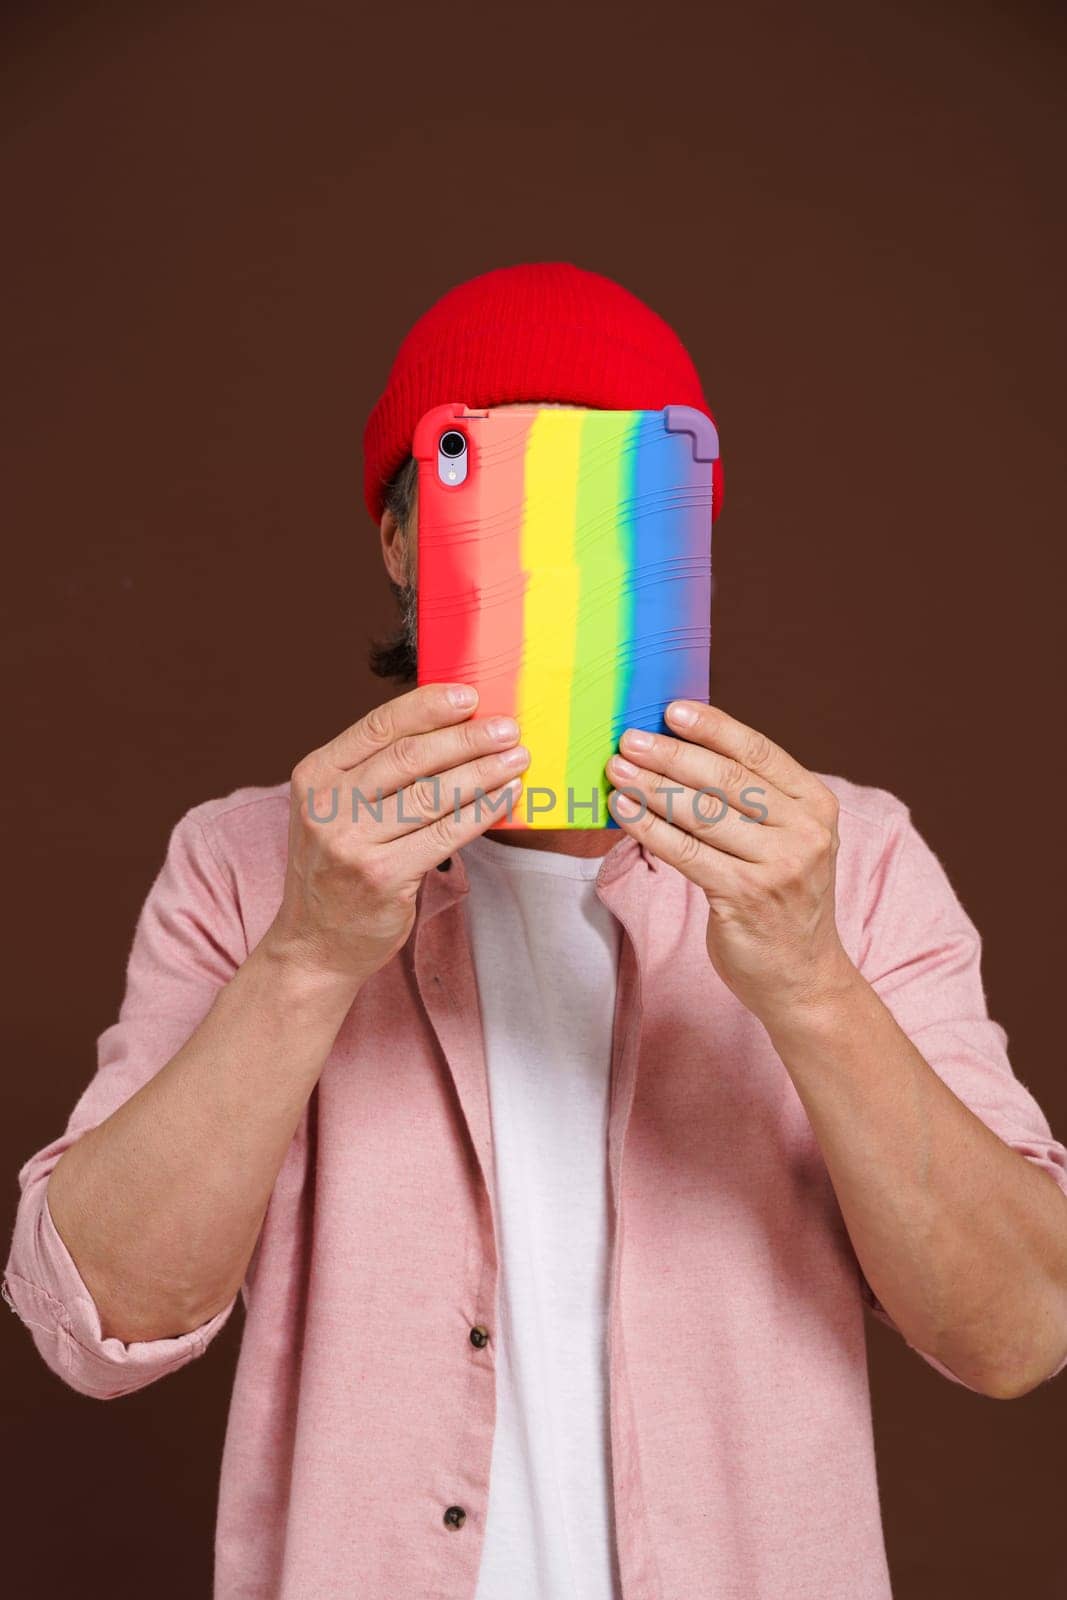 Incognito internet gay user. The man hides his sexual orientation online, covers his face with tablet in rainbow case, as symbol LGBTQ. High quality photo